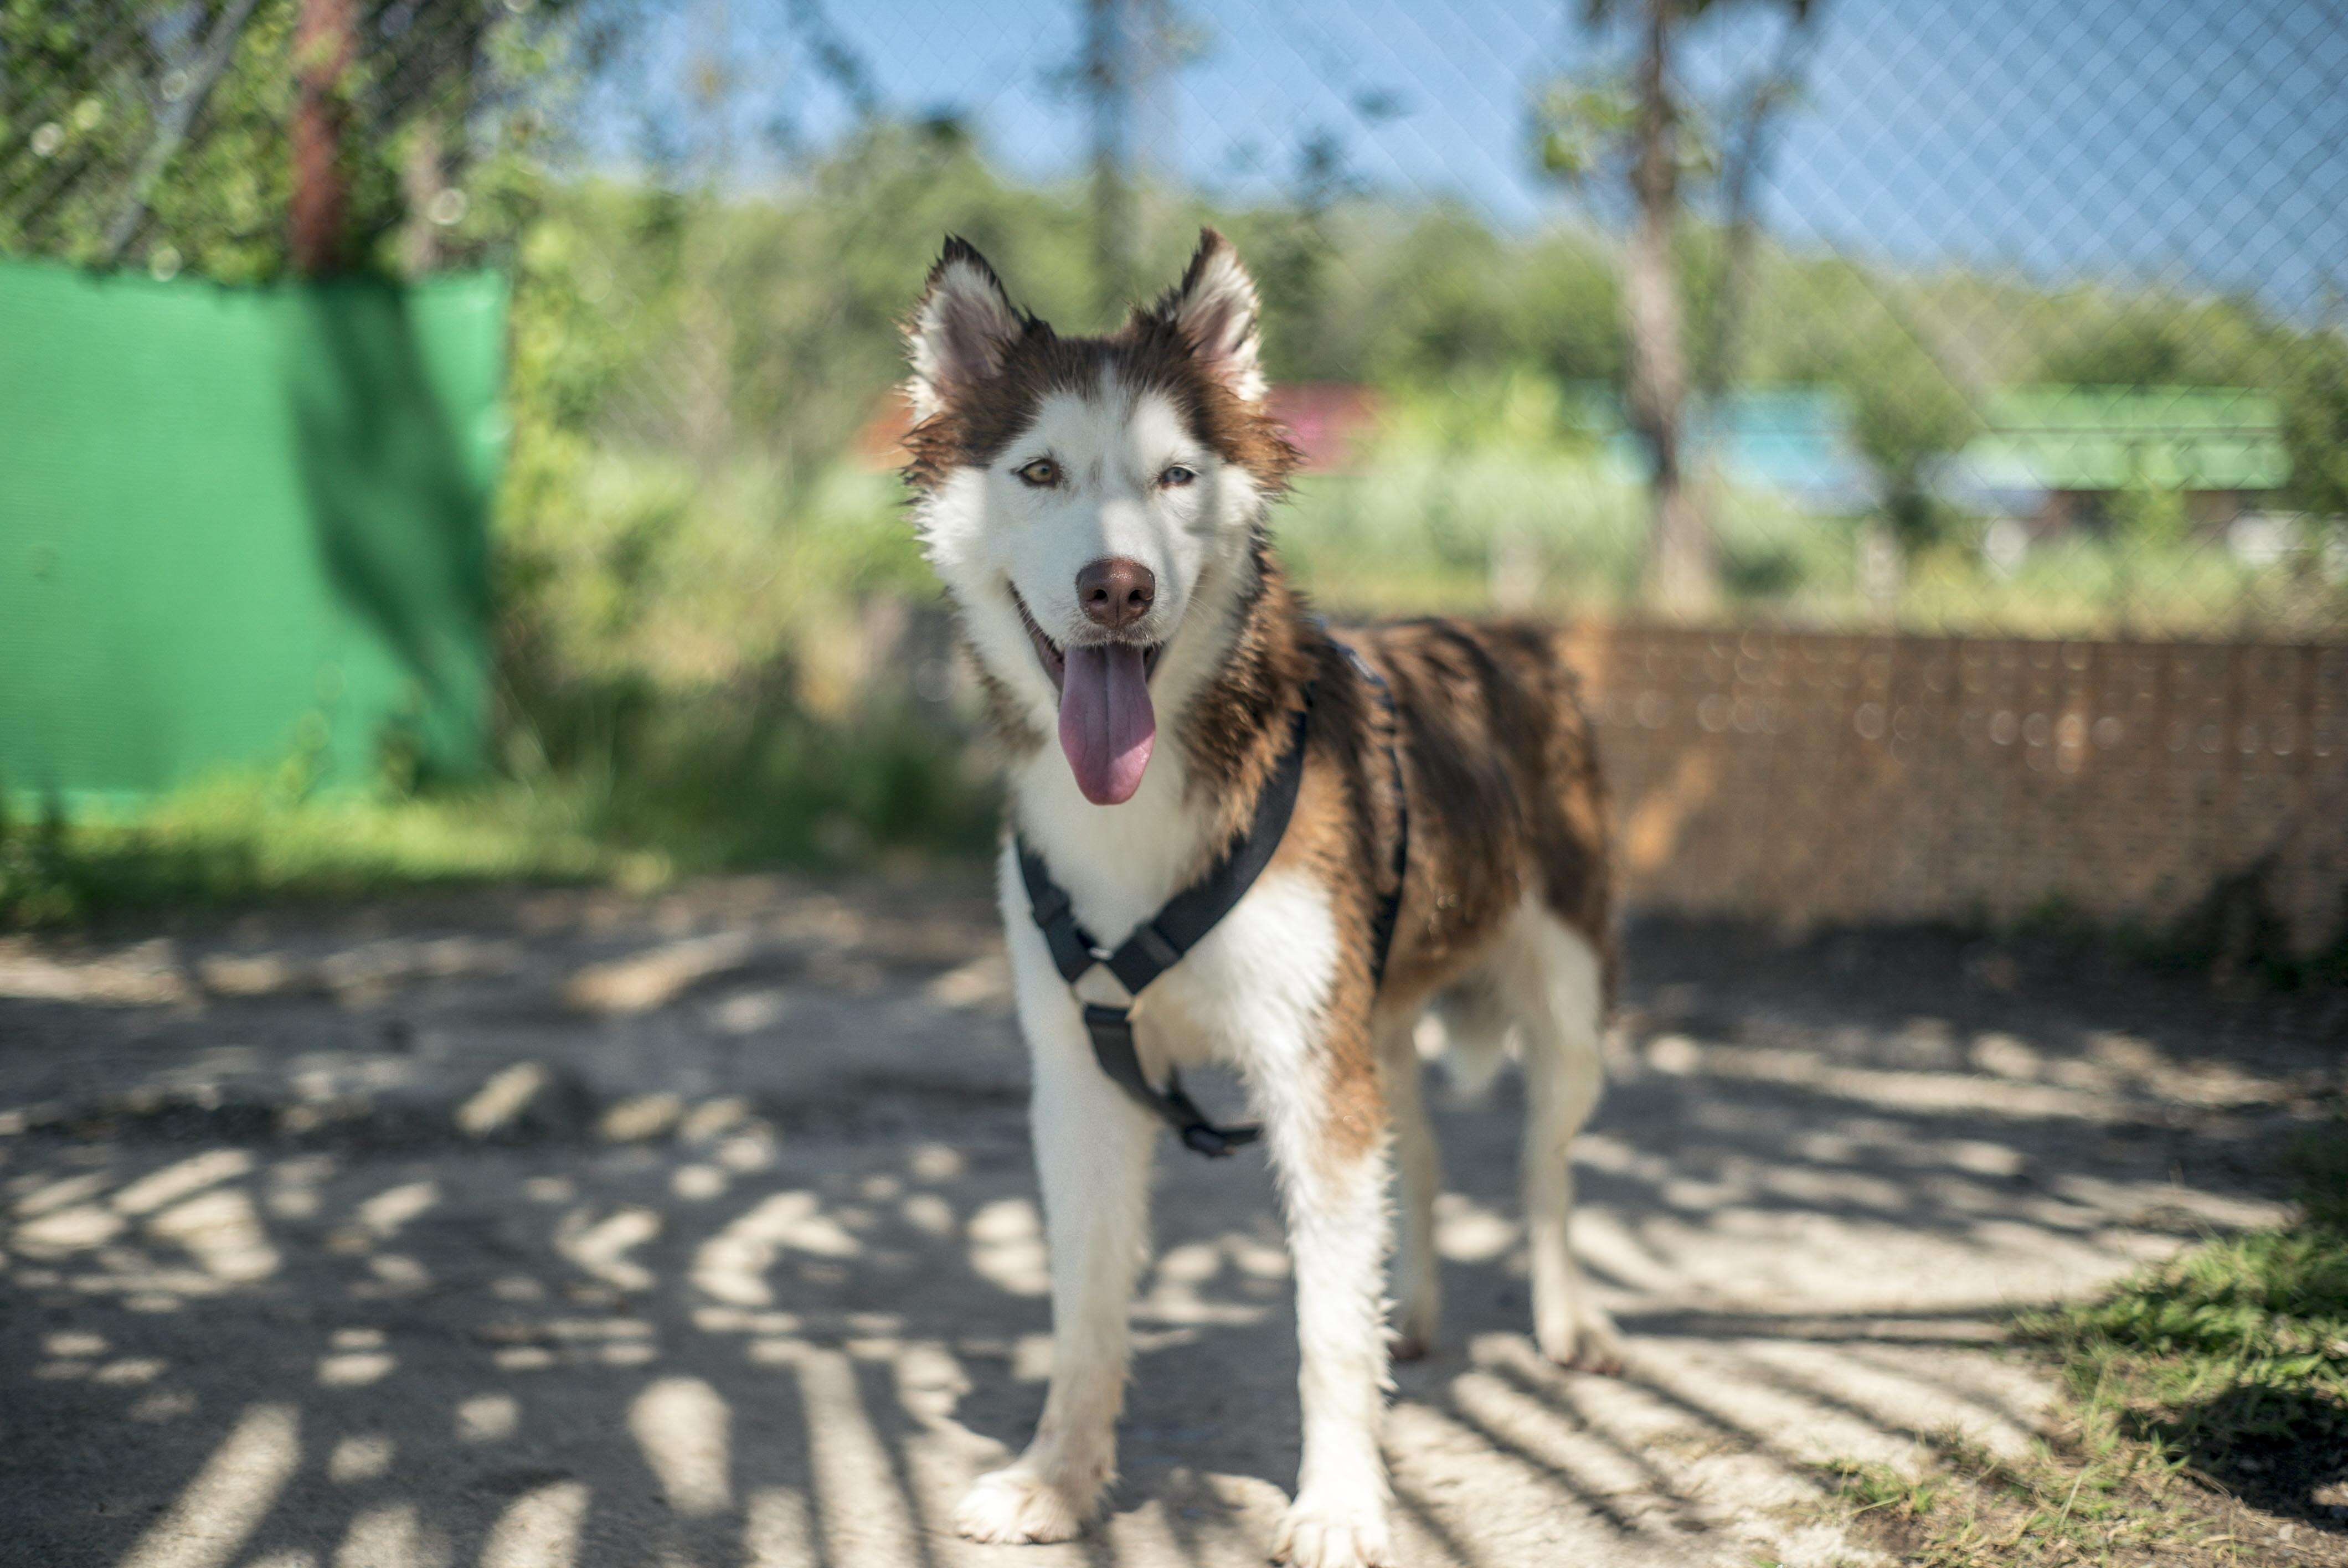 Rescued husky smiling in play yard